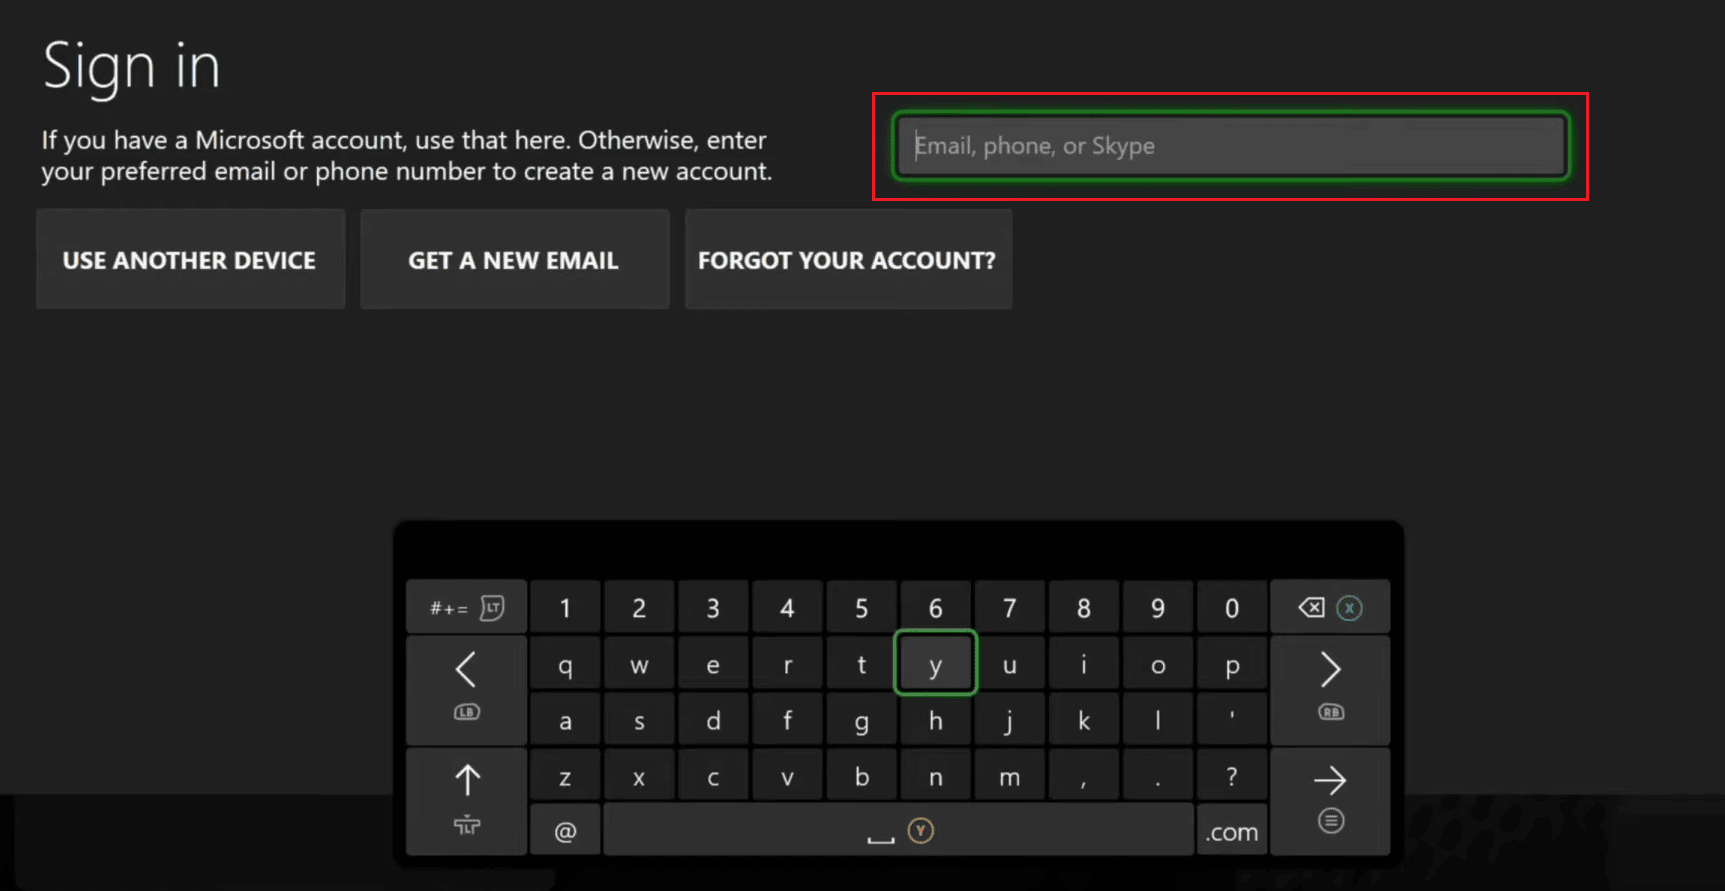 Enter your Email, phone, or Skype in the given field to Sign in | reconnect to Xbox Live